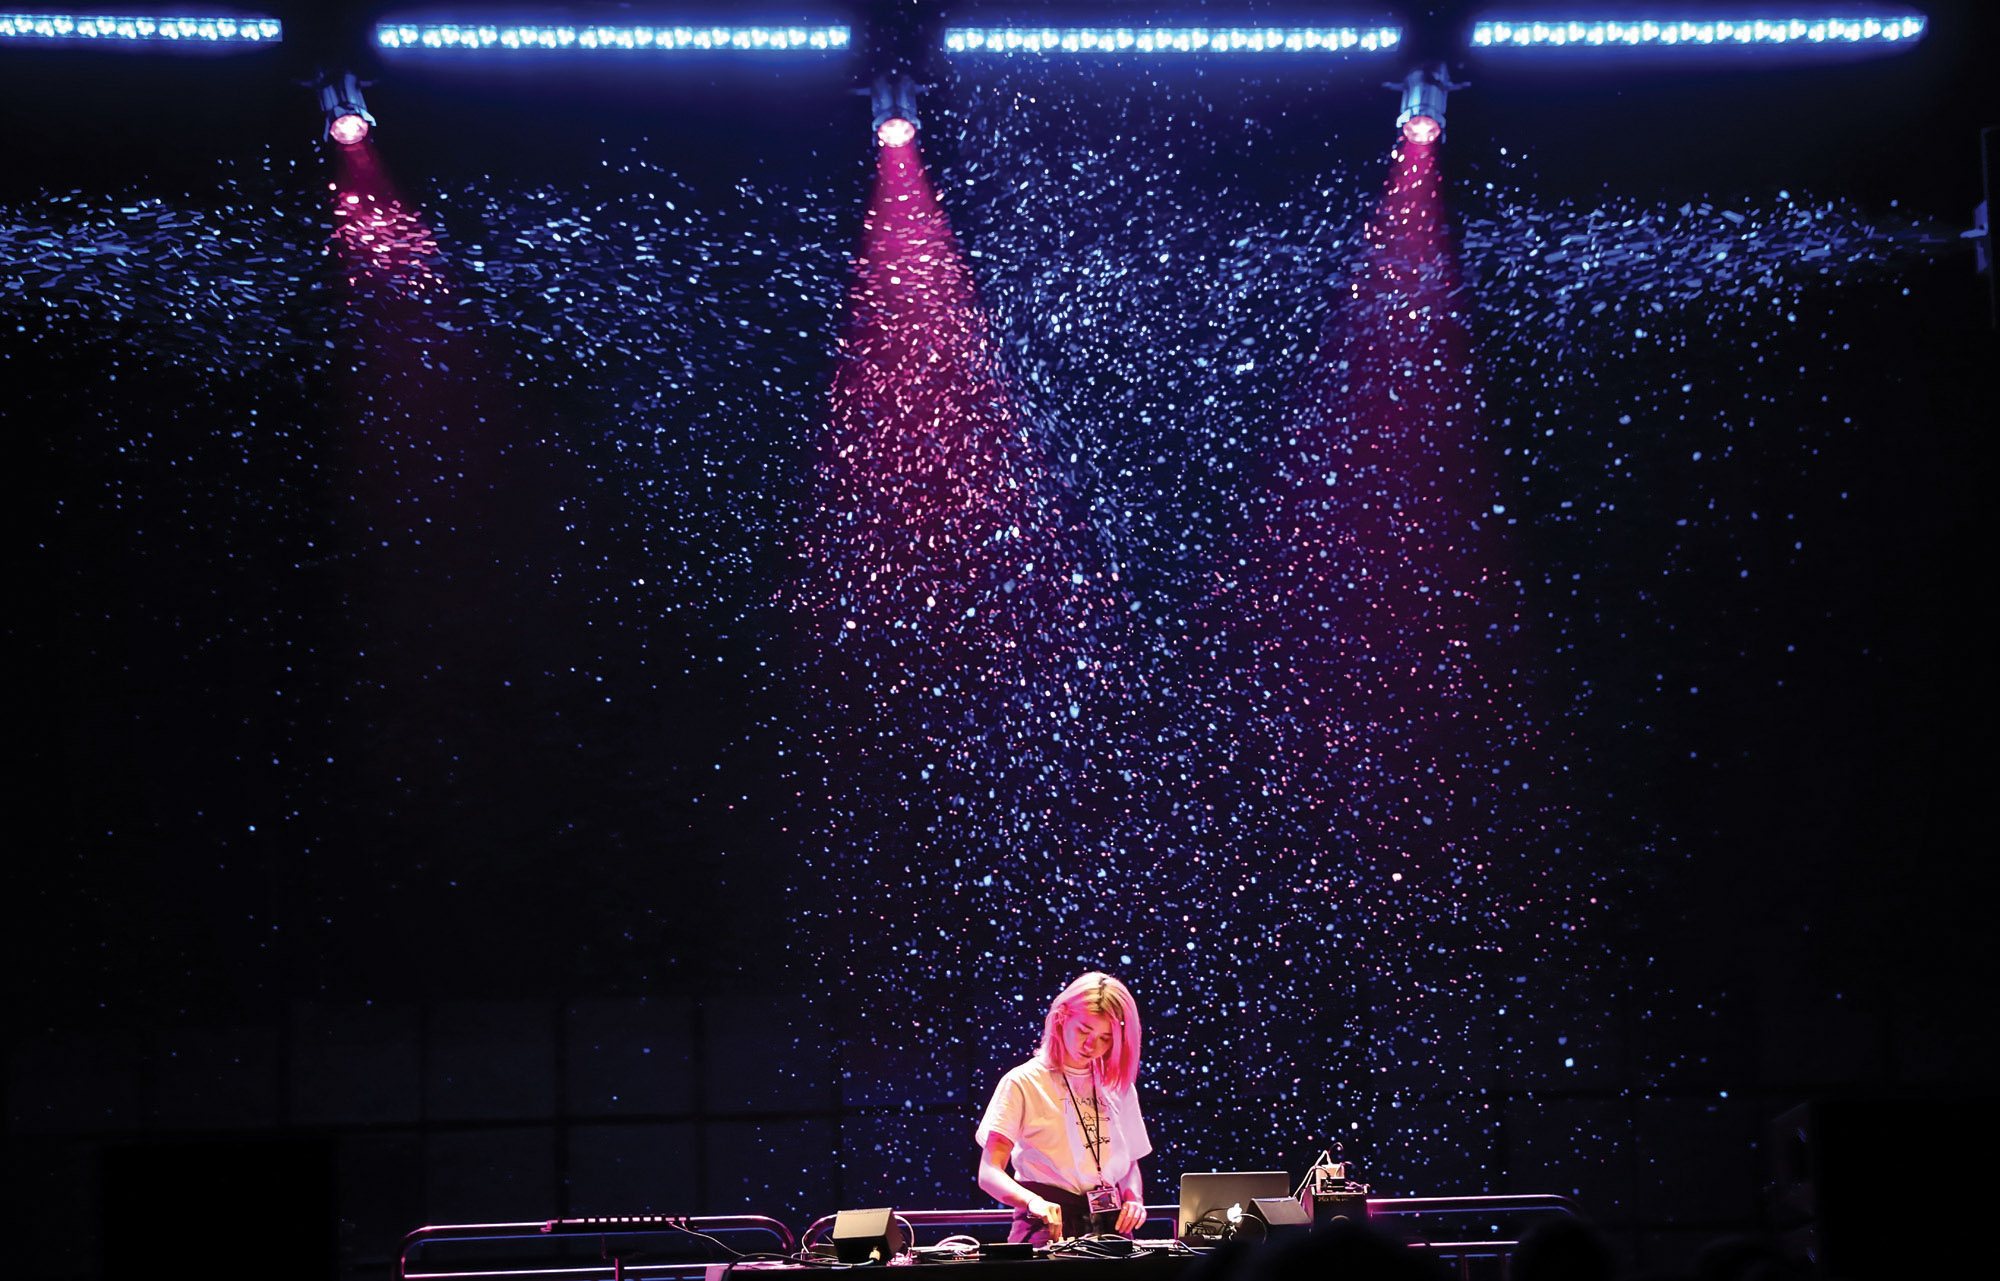 Qrion DJing on stage in front of a wall of pink and blue star-esque lights. 